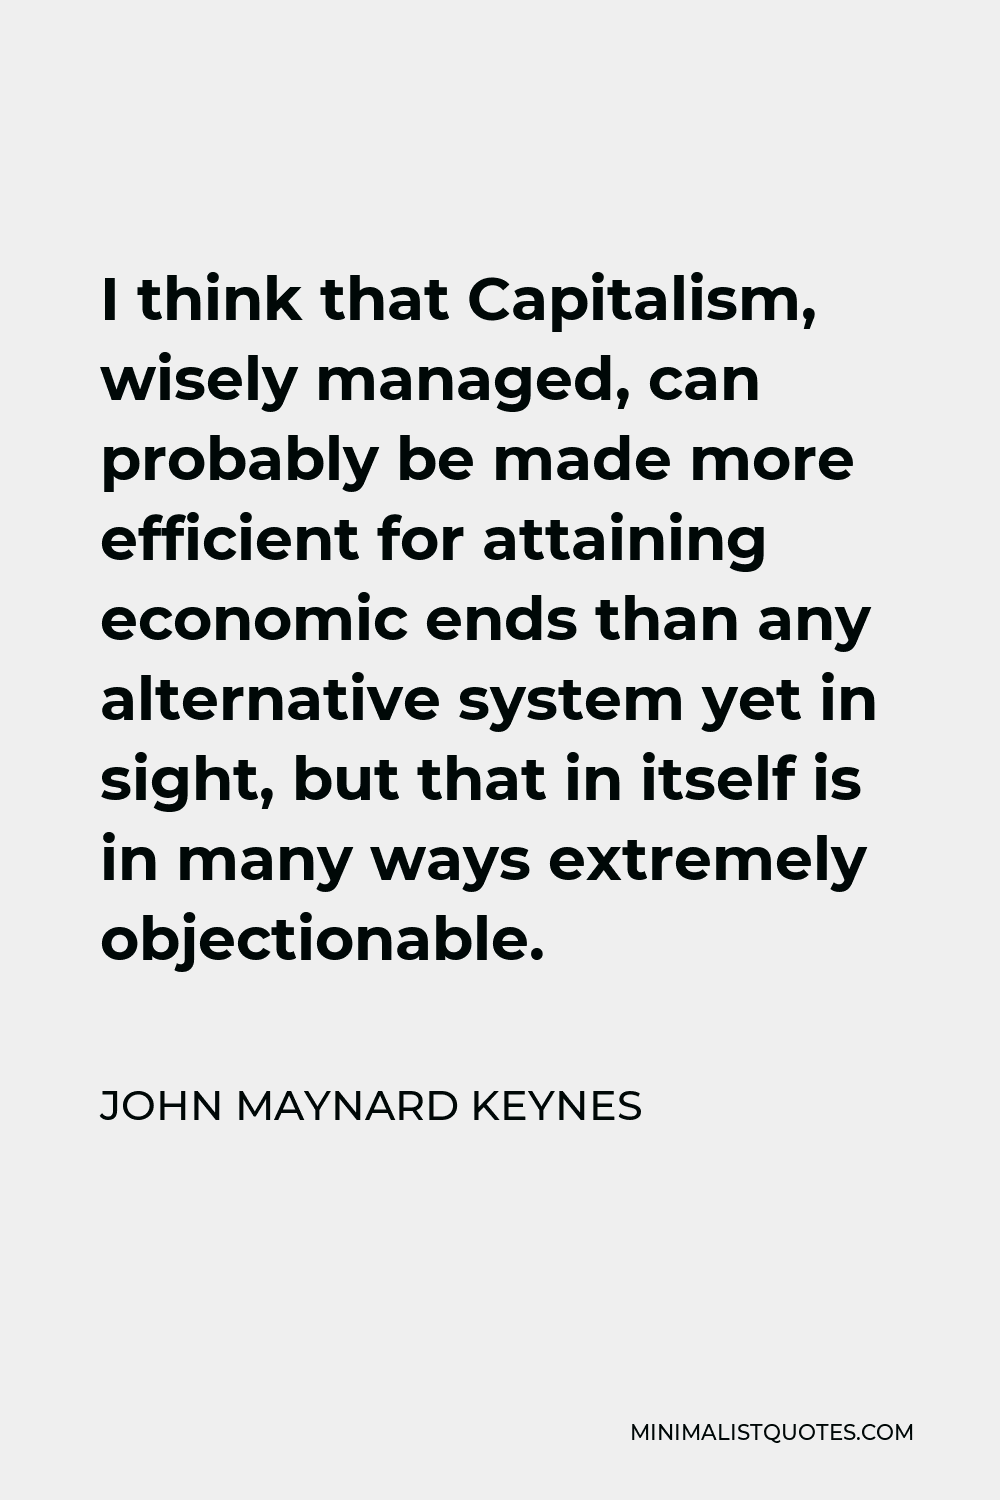 John Maynard Keynes Quote - I think that Capitalism, wisely managed, can probably be made more efficient for attaining economic ends than any alternative system yet in sight, but that in itself is in many ways extremely objectionable.